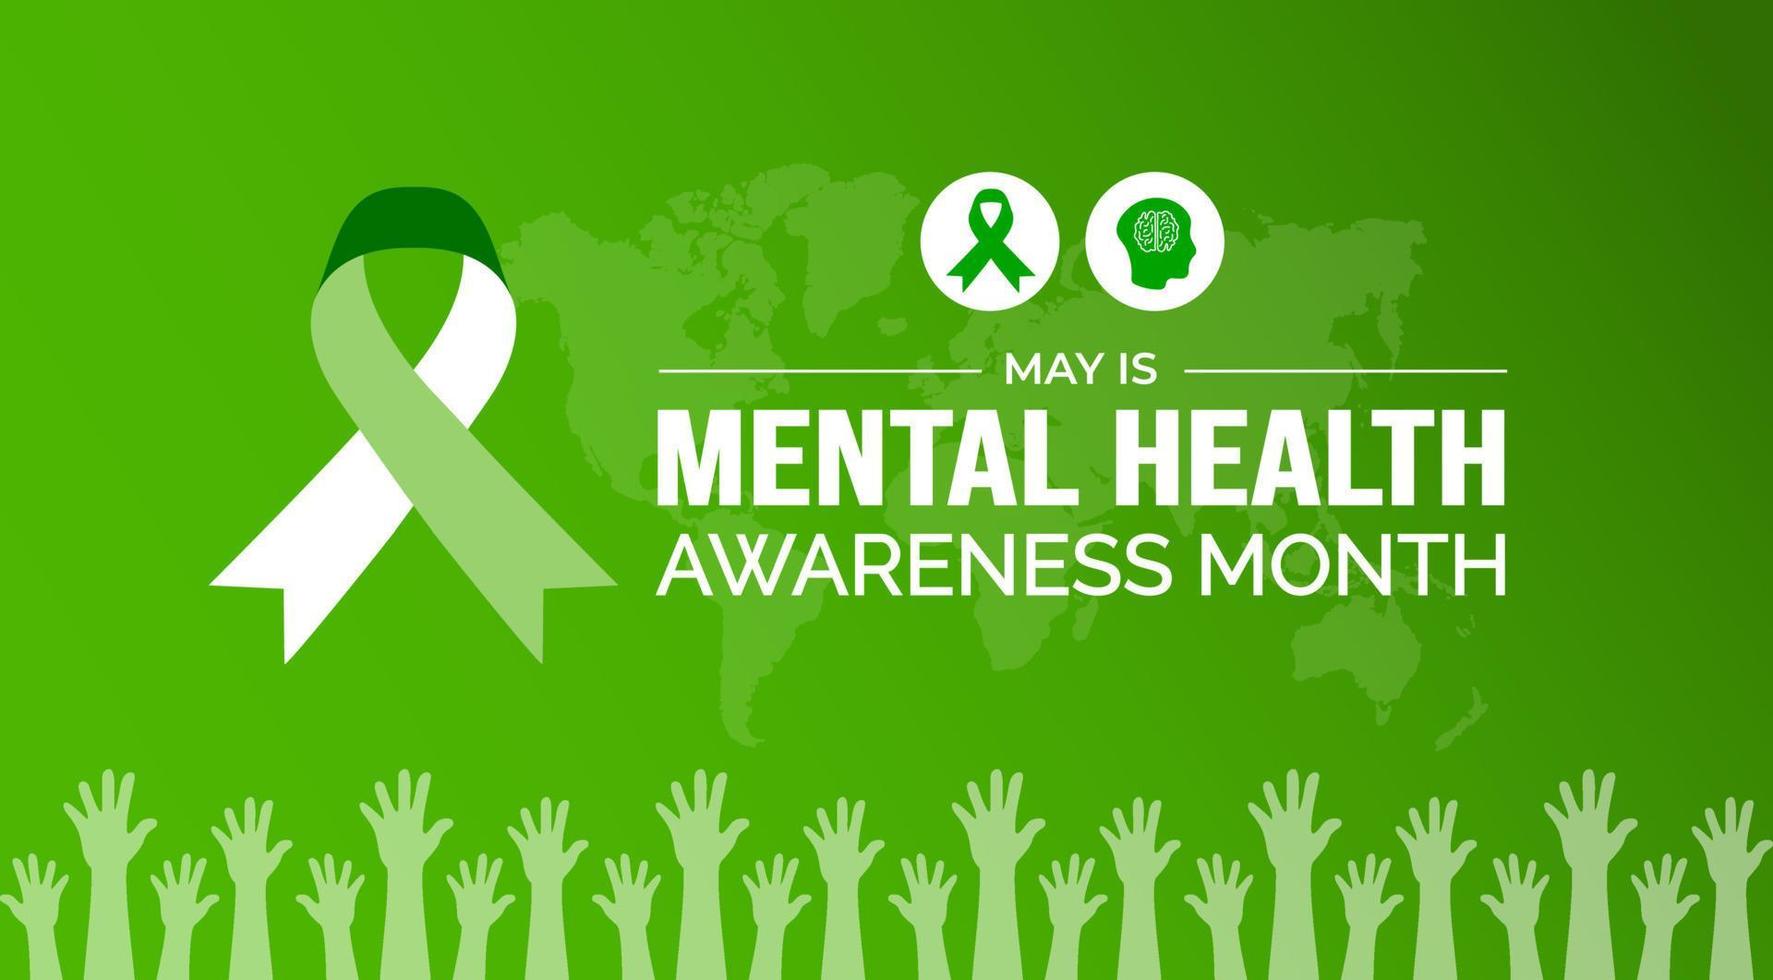 Mental Health Awareness Month background or banner design template celebrated in may vector